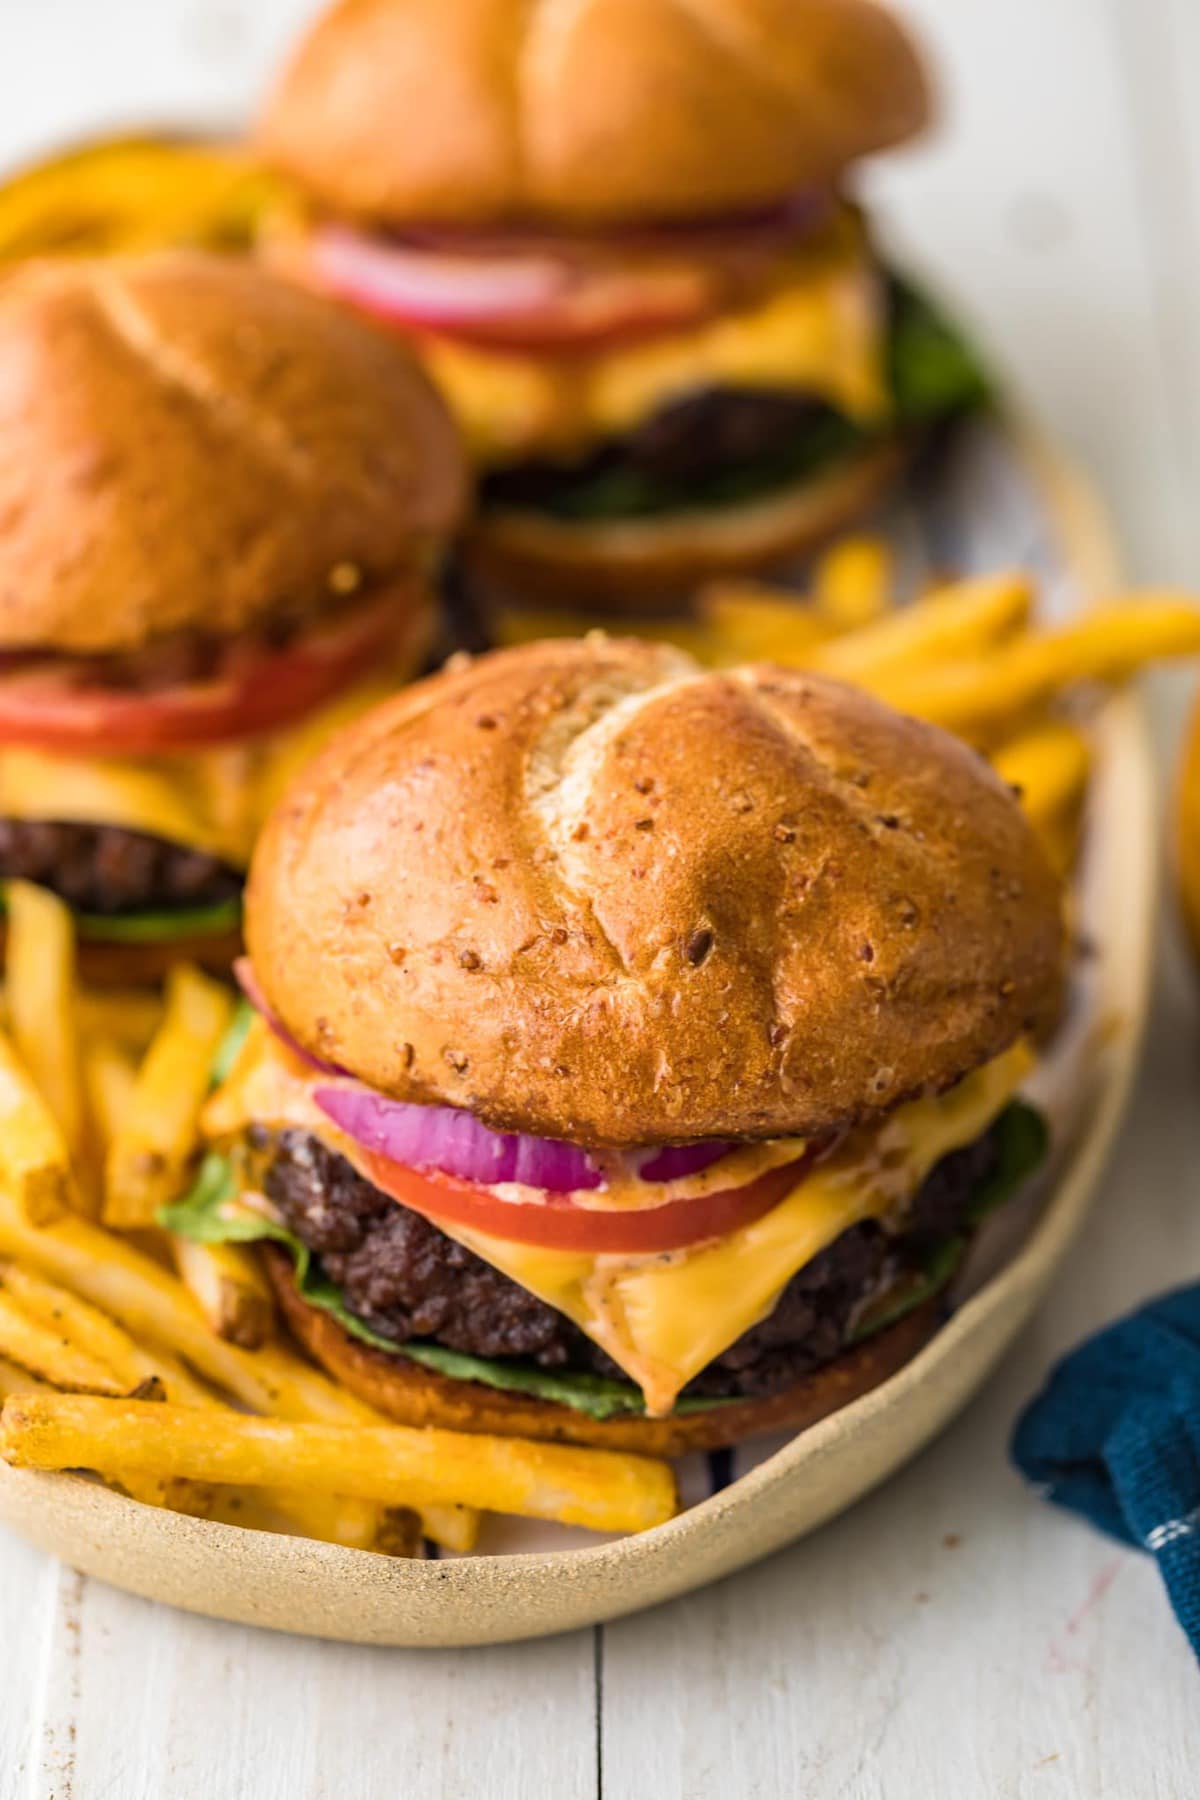 grilled burgers on a platter with French fries